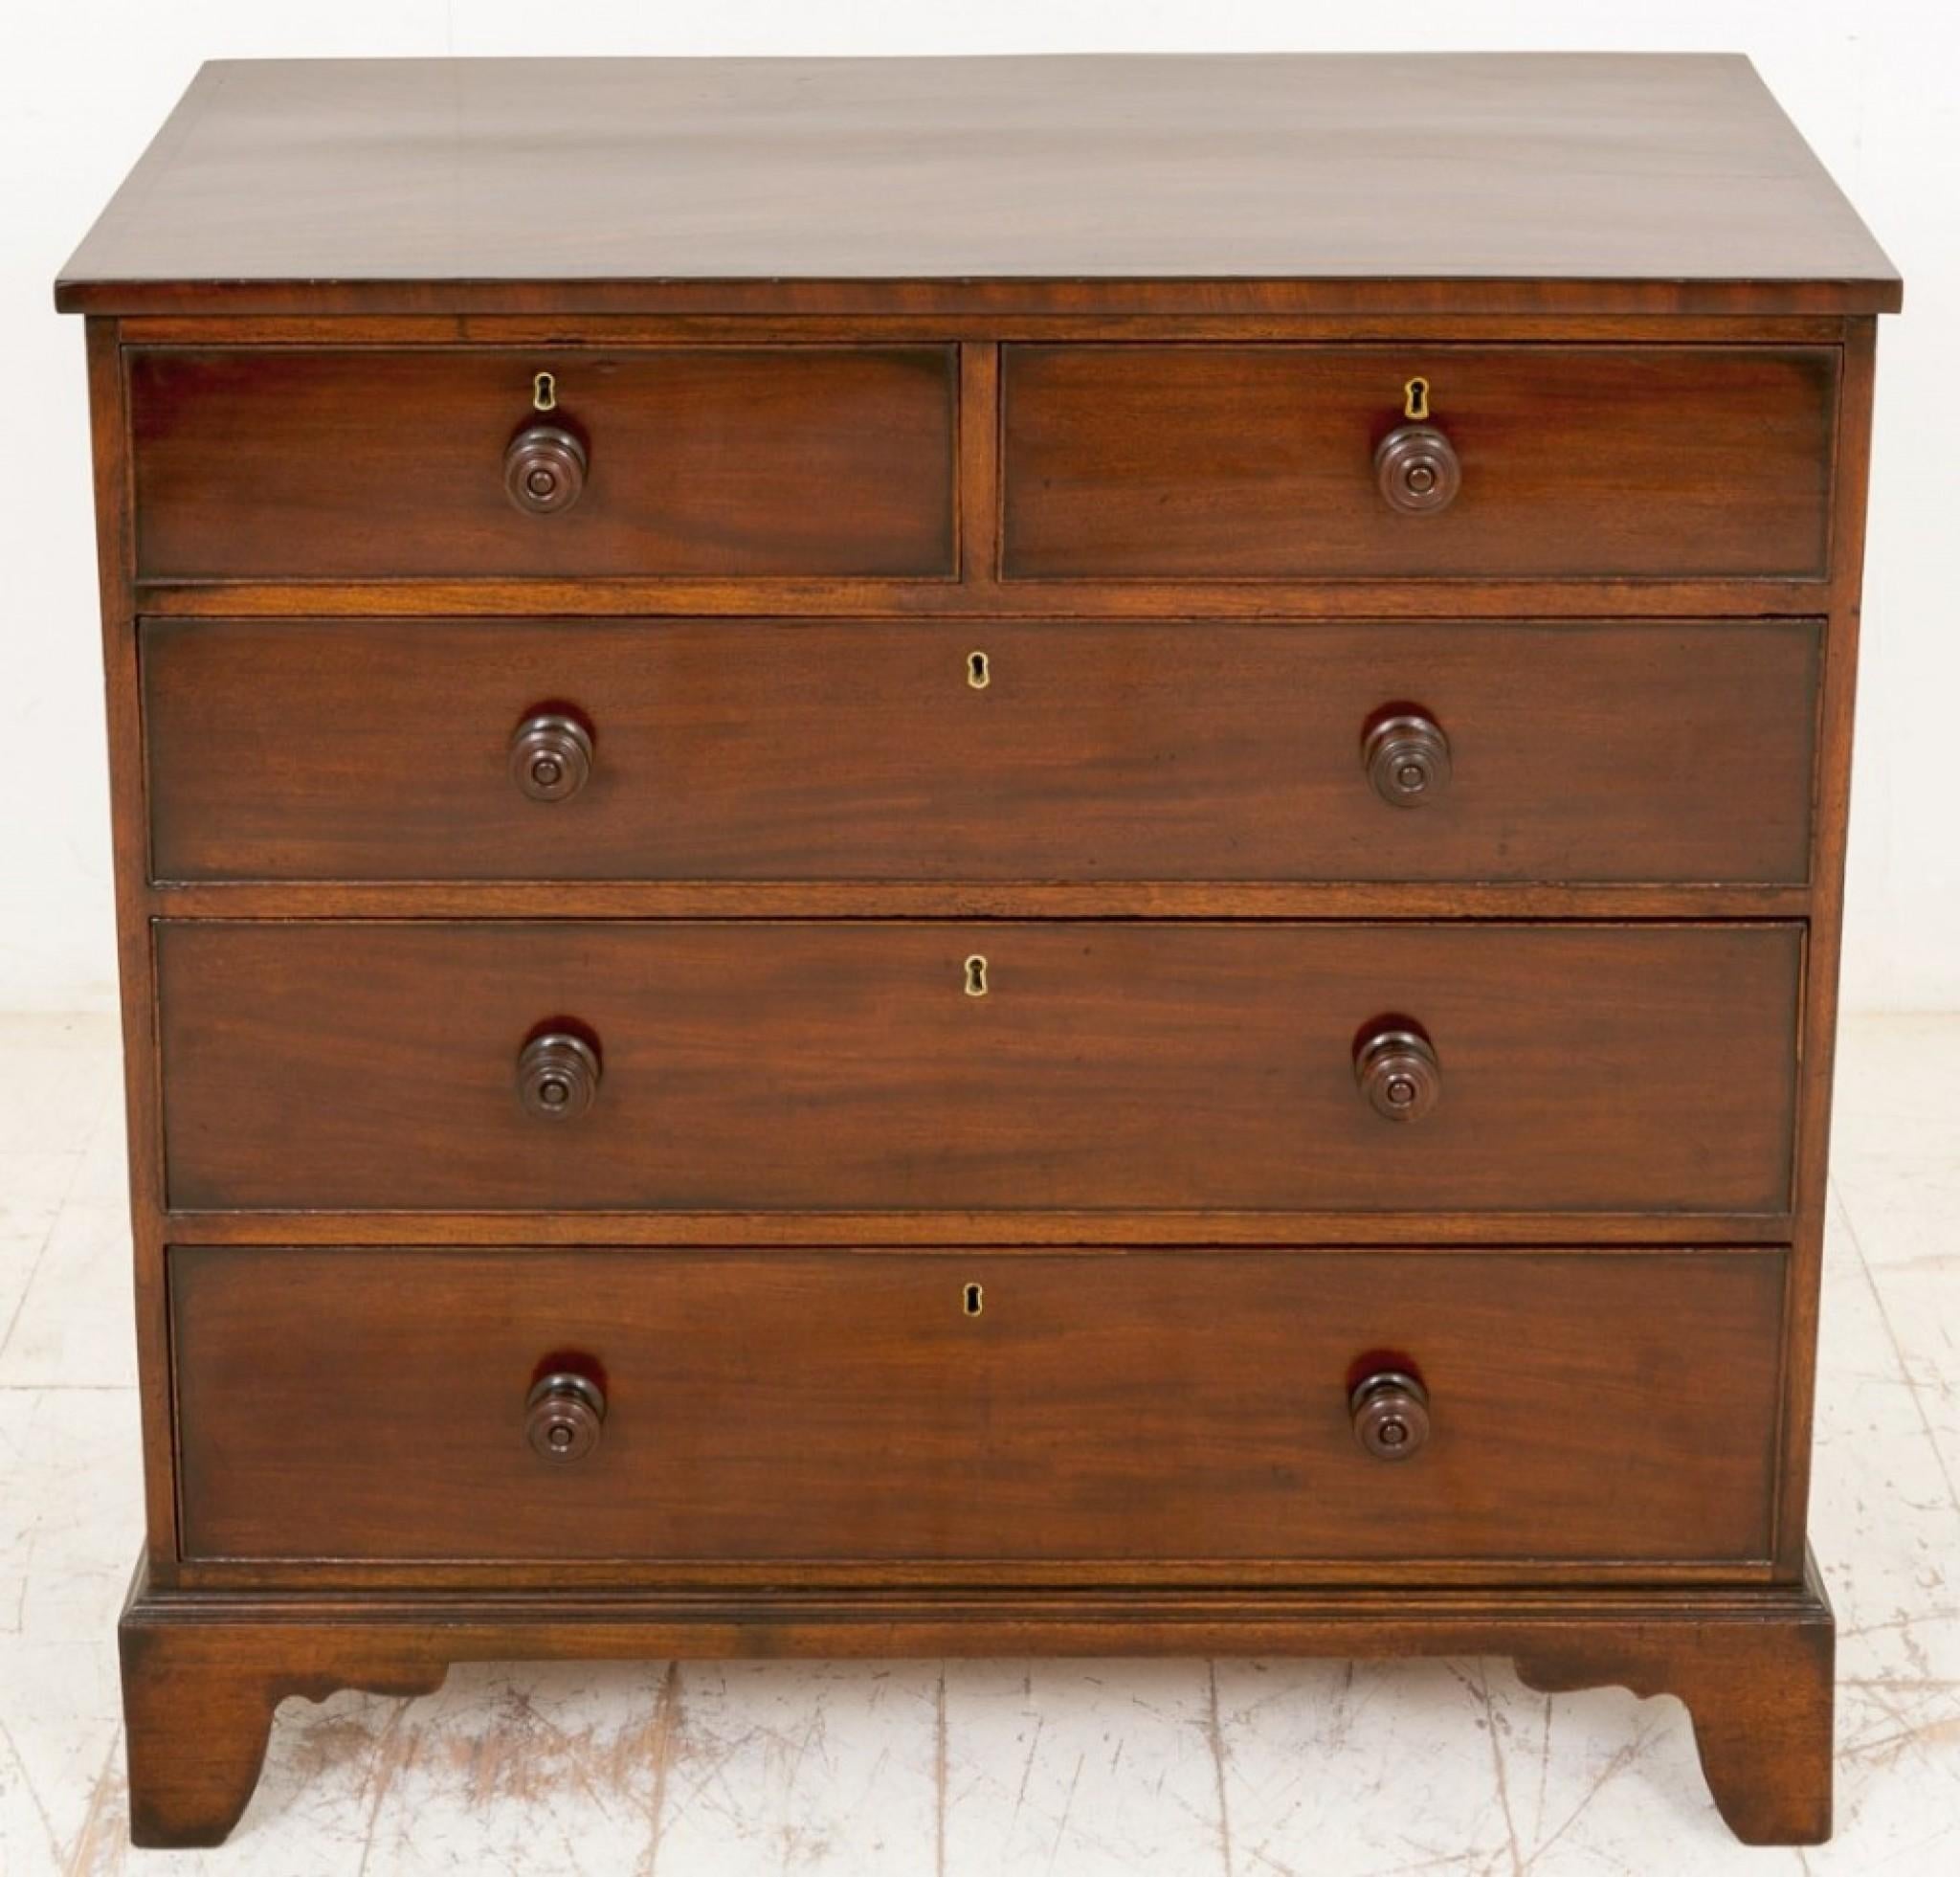 Georgian Mahogany 2 over 3 Chest of Drawers.
Standing on nicely shaped bracket feet.
Circa 1800
The Mahogany and pine lined drawers with original locks and original turned knobs.
The highly figured top featuring cross banding with ebonised lines.